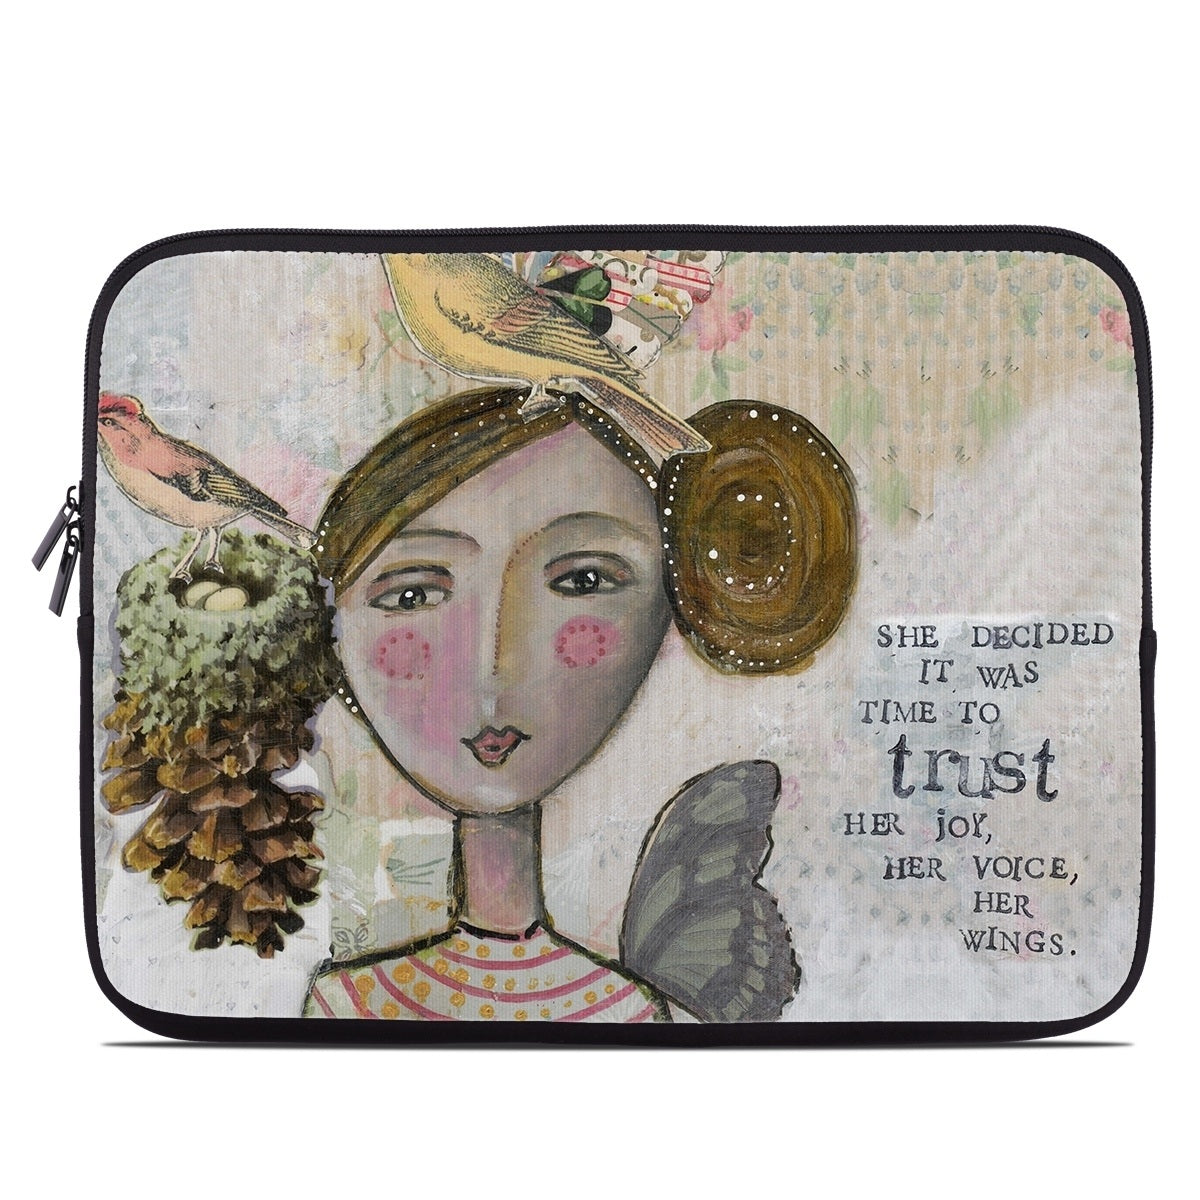 Time To Trust - Laptop Sleeve